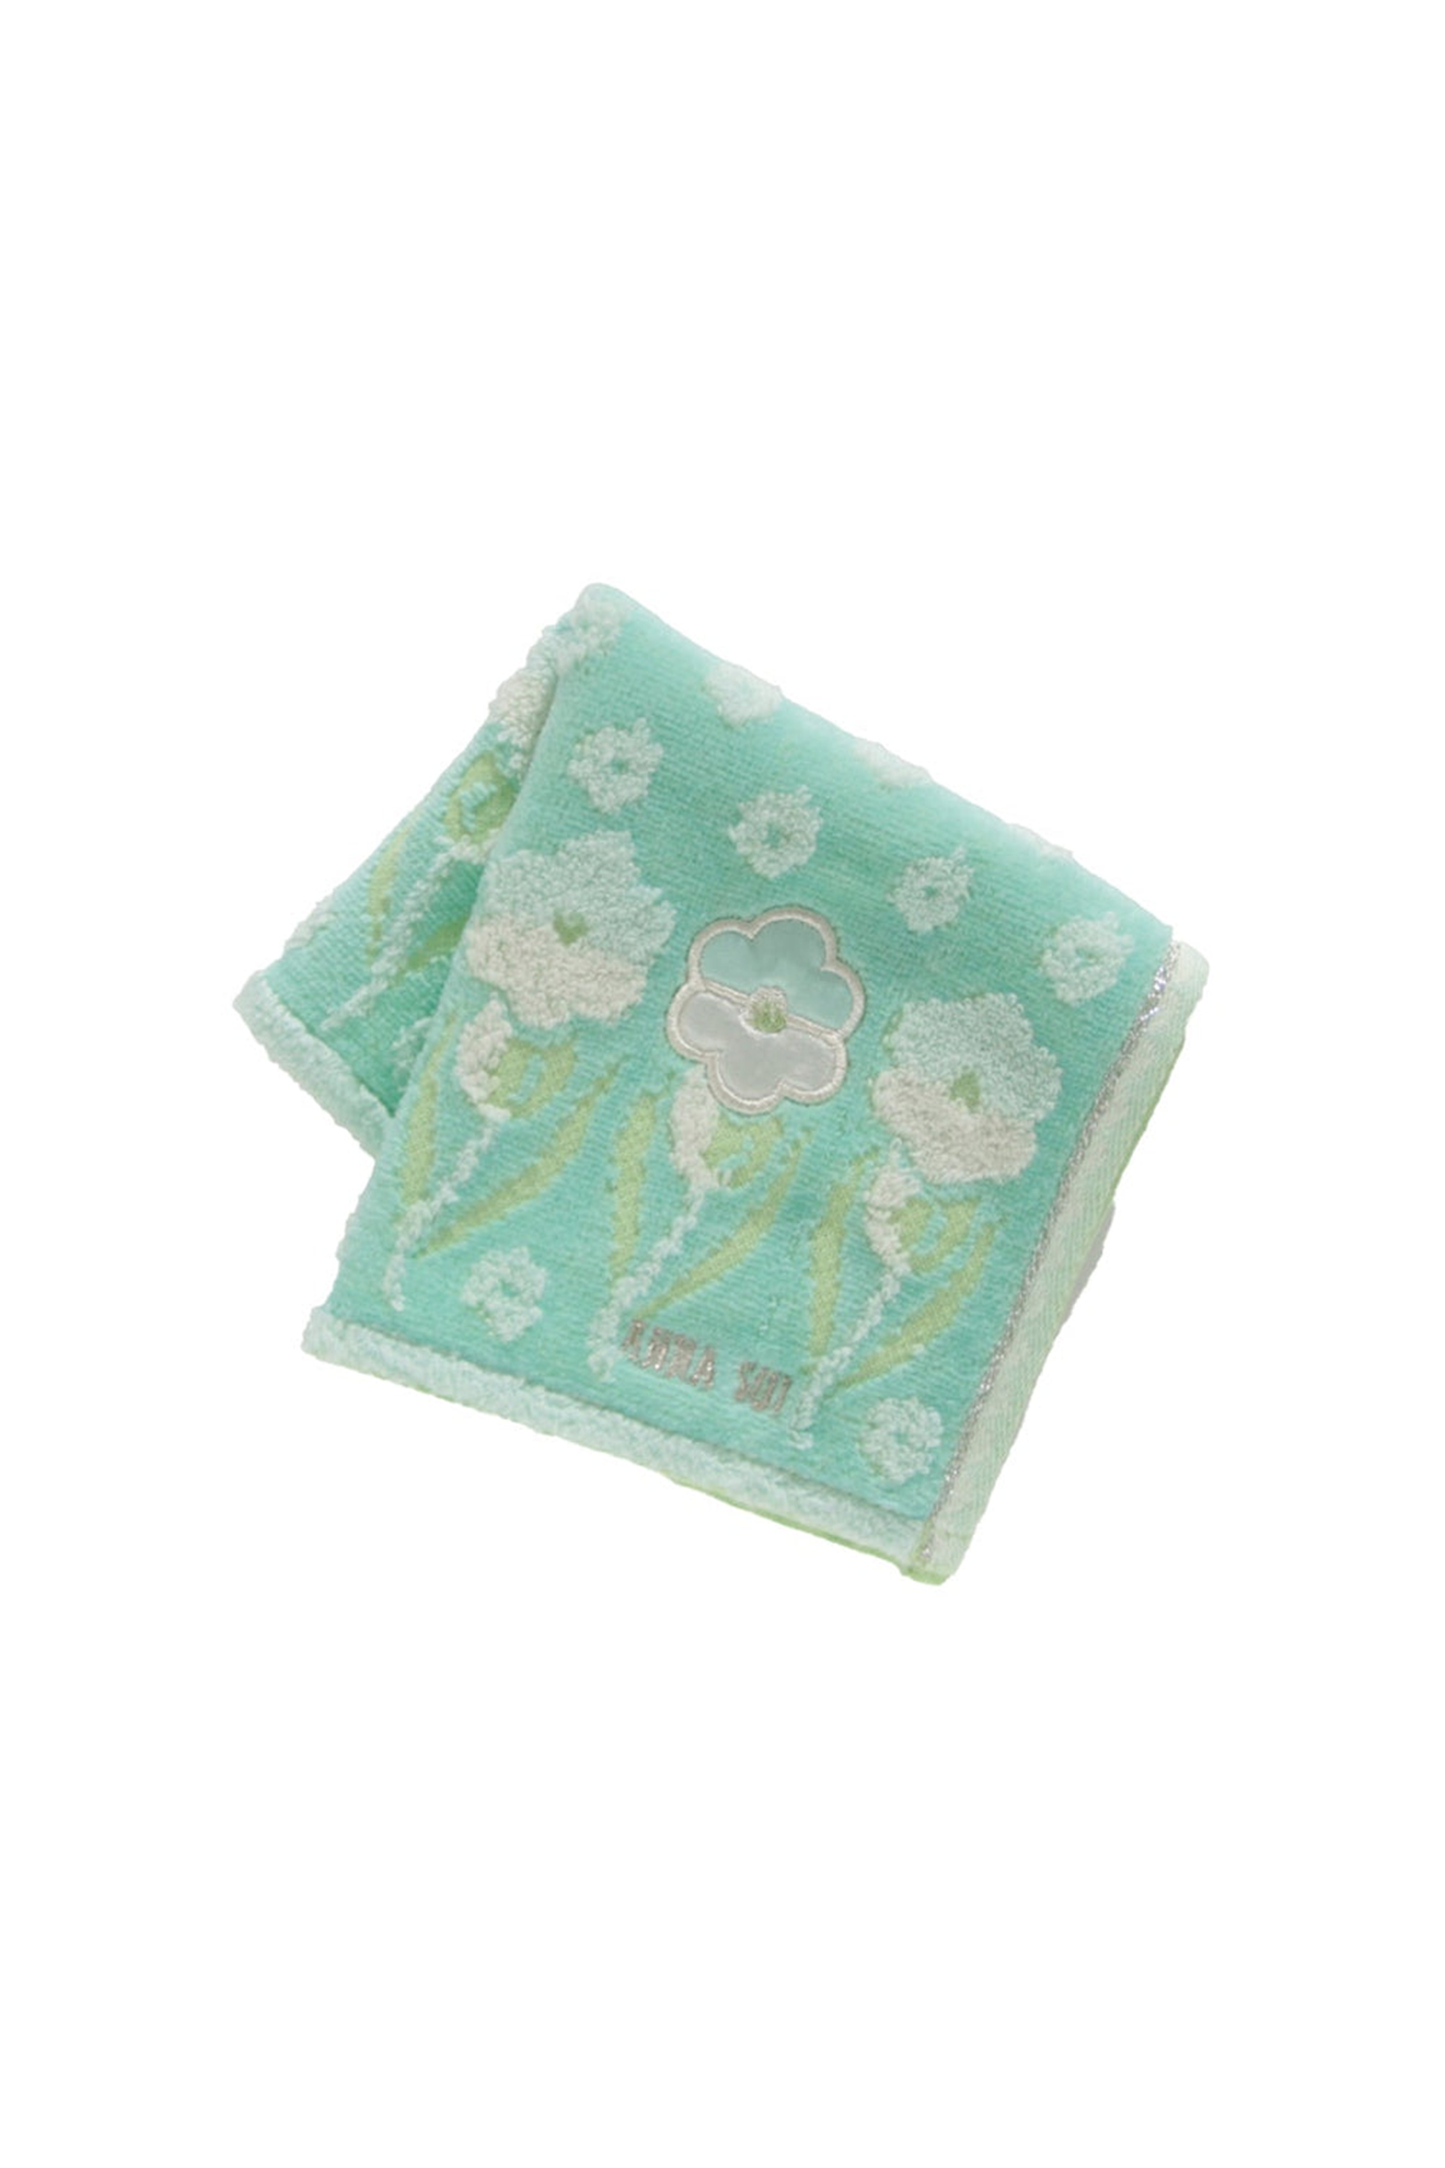 Other side of Pansy Panel Washcloth, green with lines of white Pansy, Anna Sui label at bottom 